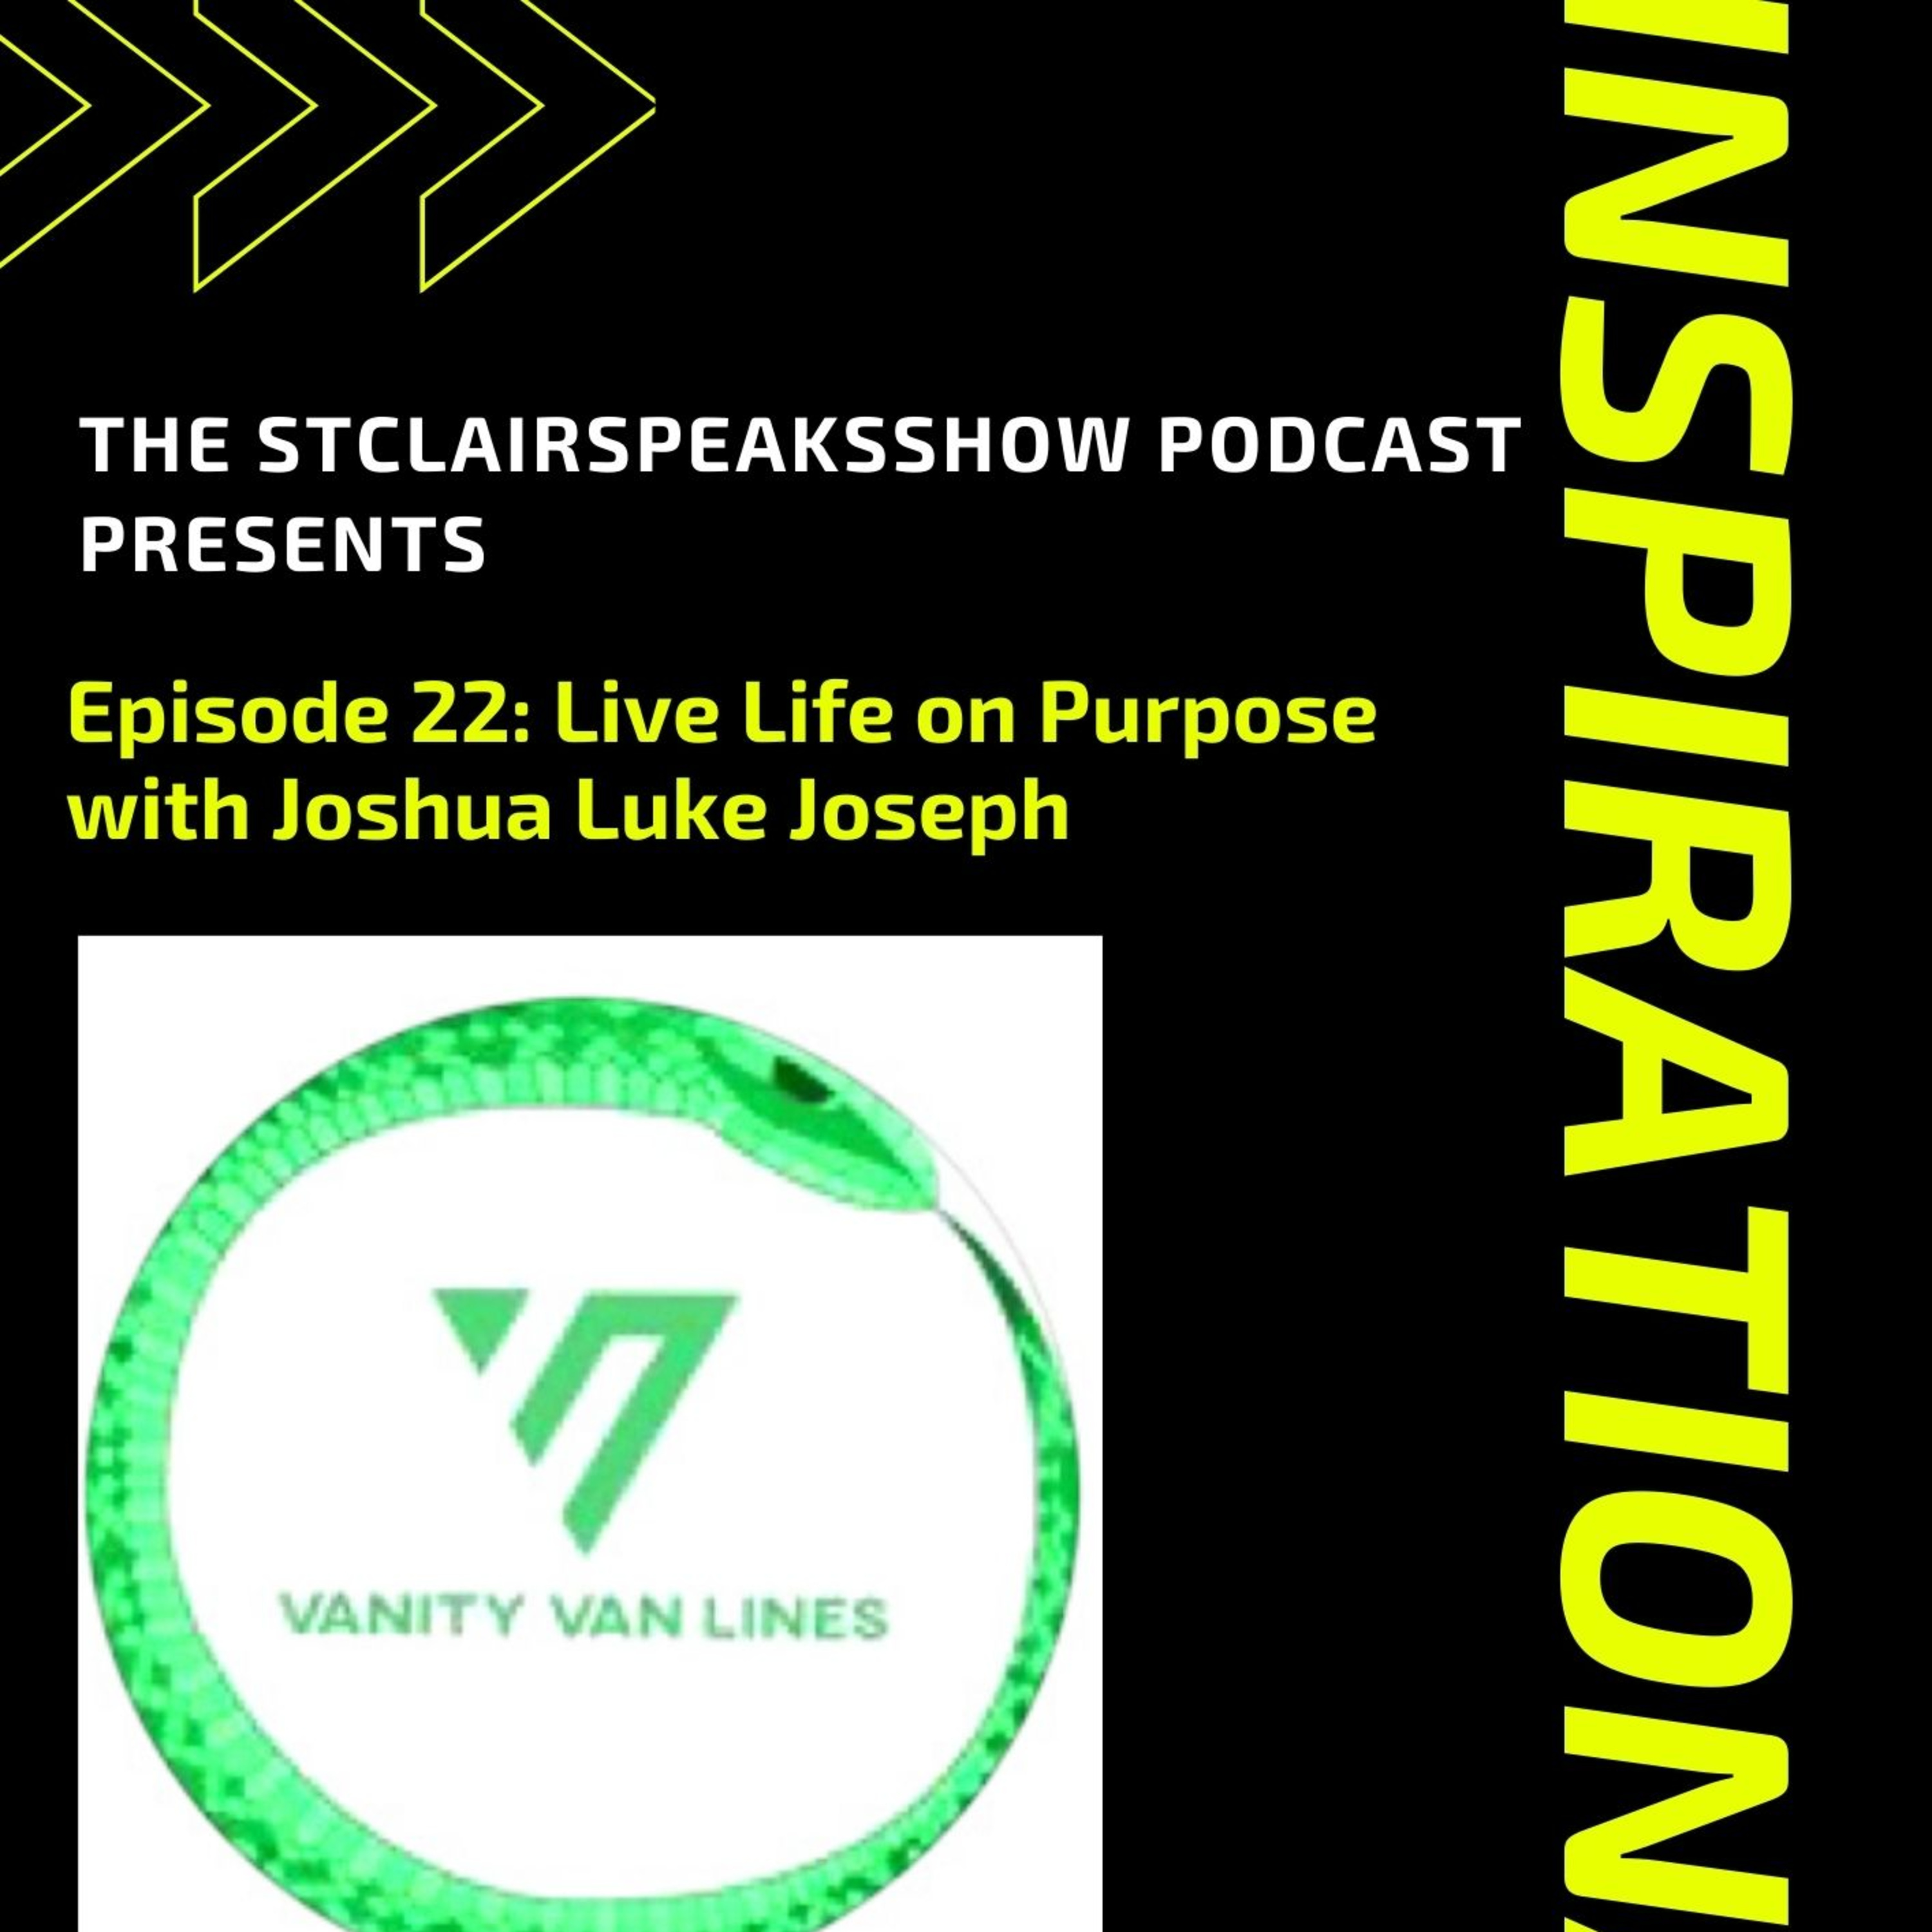 The StclairSpeaksShow Podcast Featuring Joshua Joseph CEO & Founder of Vanity Van Lines Image